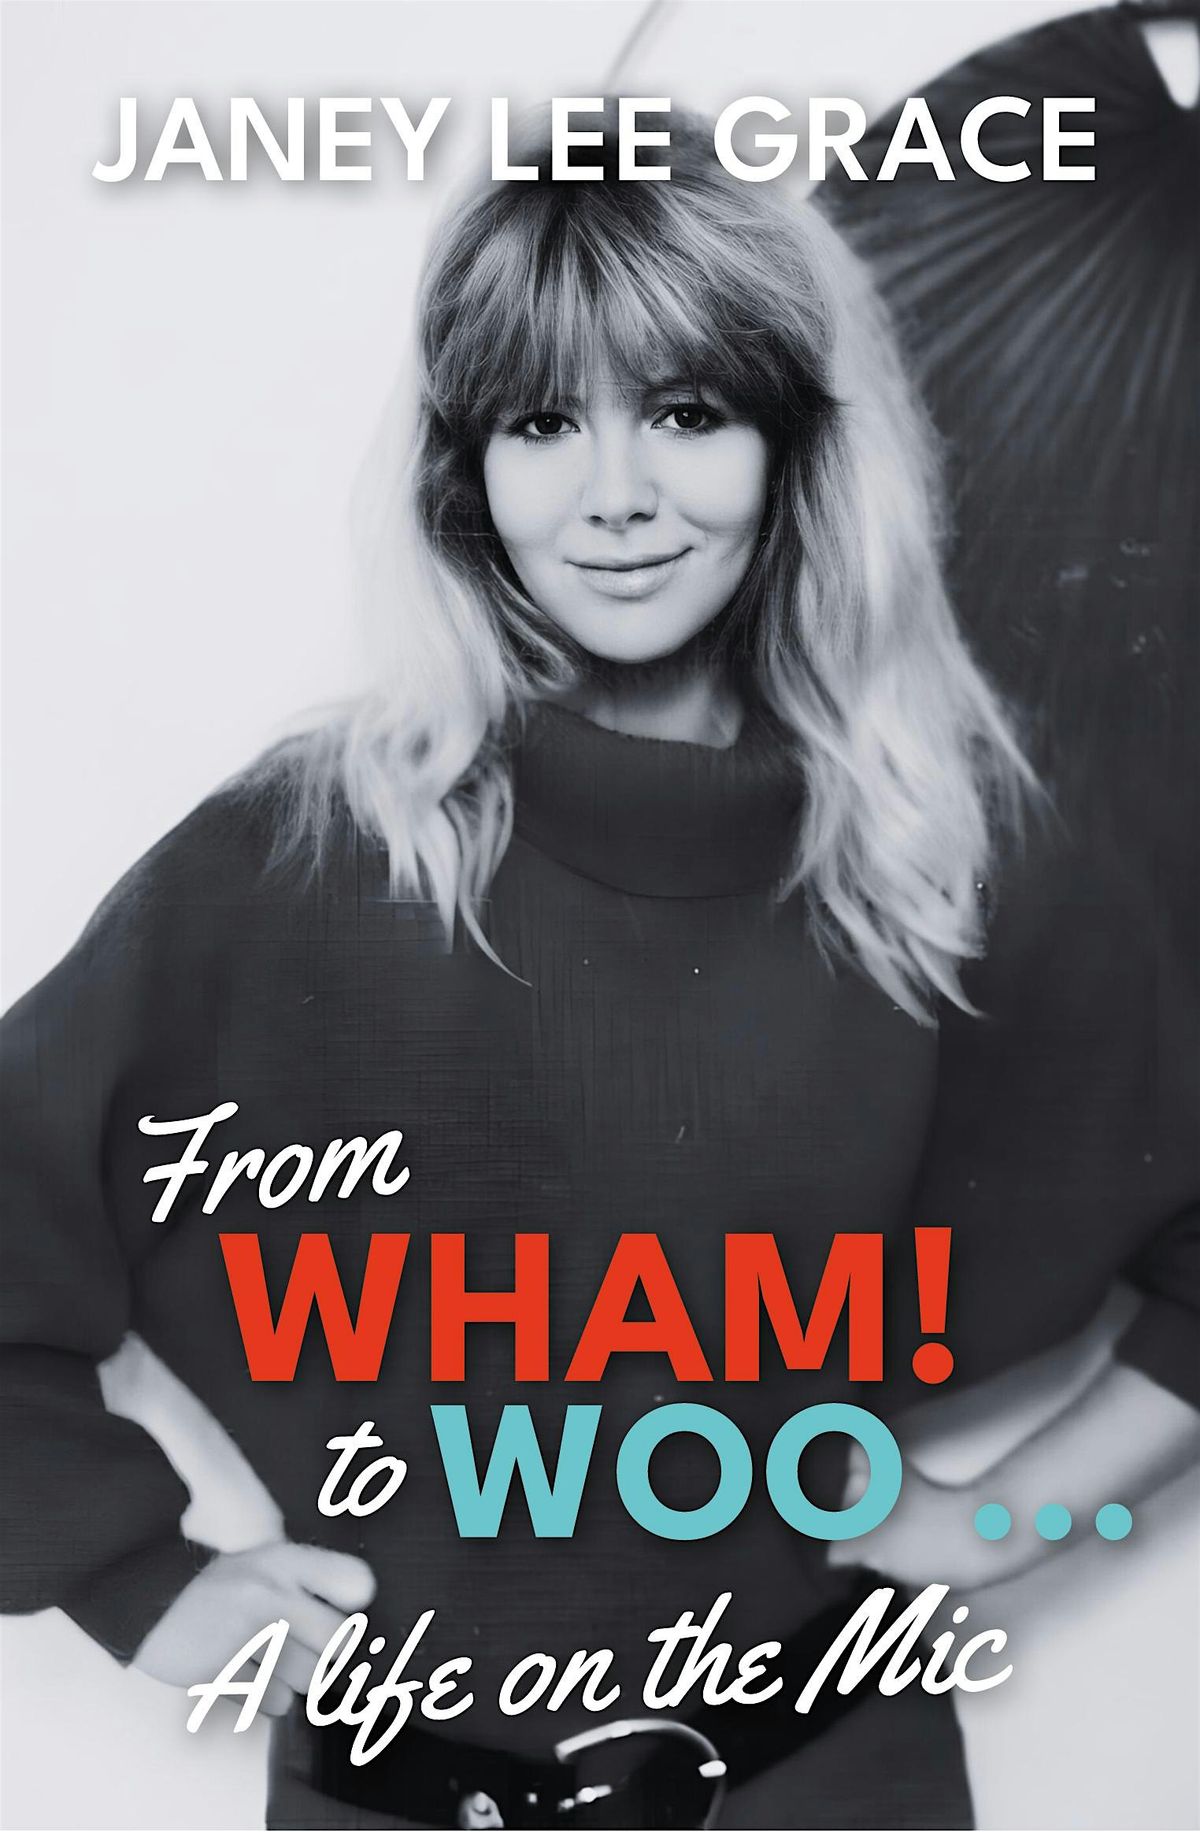 From WHAM! to WOO - A life on the Mic: JANEY LEE GRACE in conversation